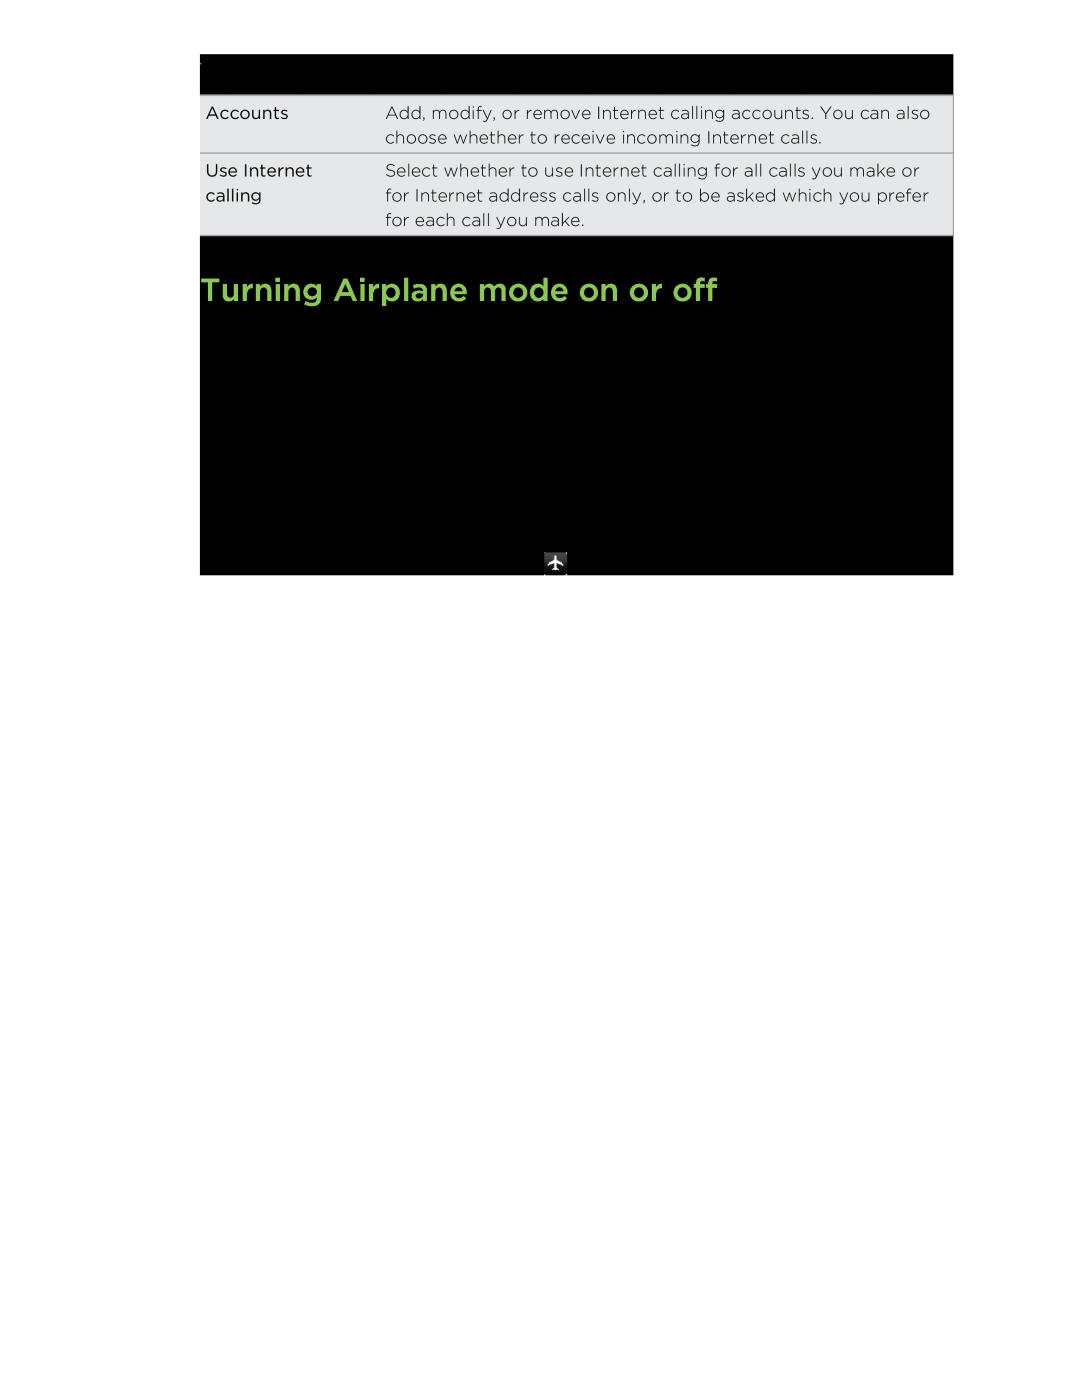 HTC S manual Turning Airplane mode on or off, Phone calls 